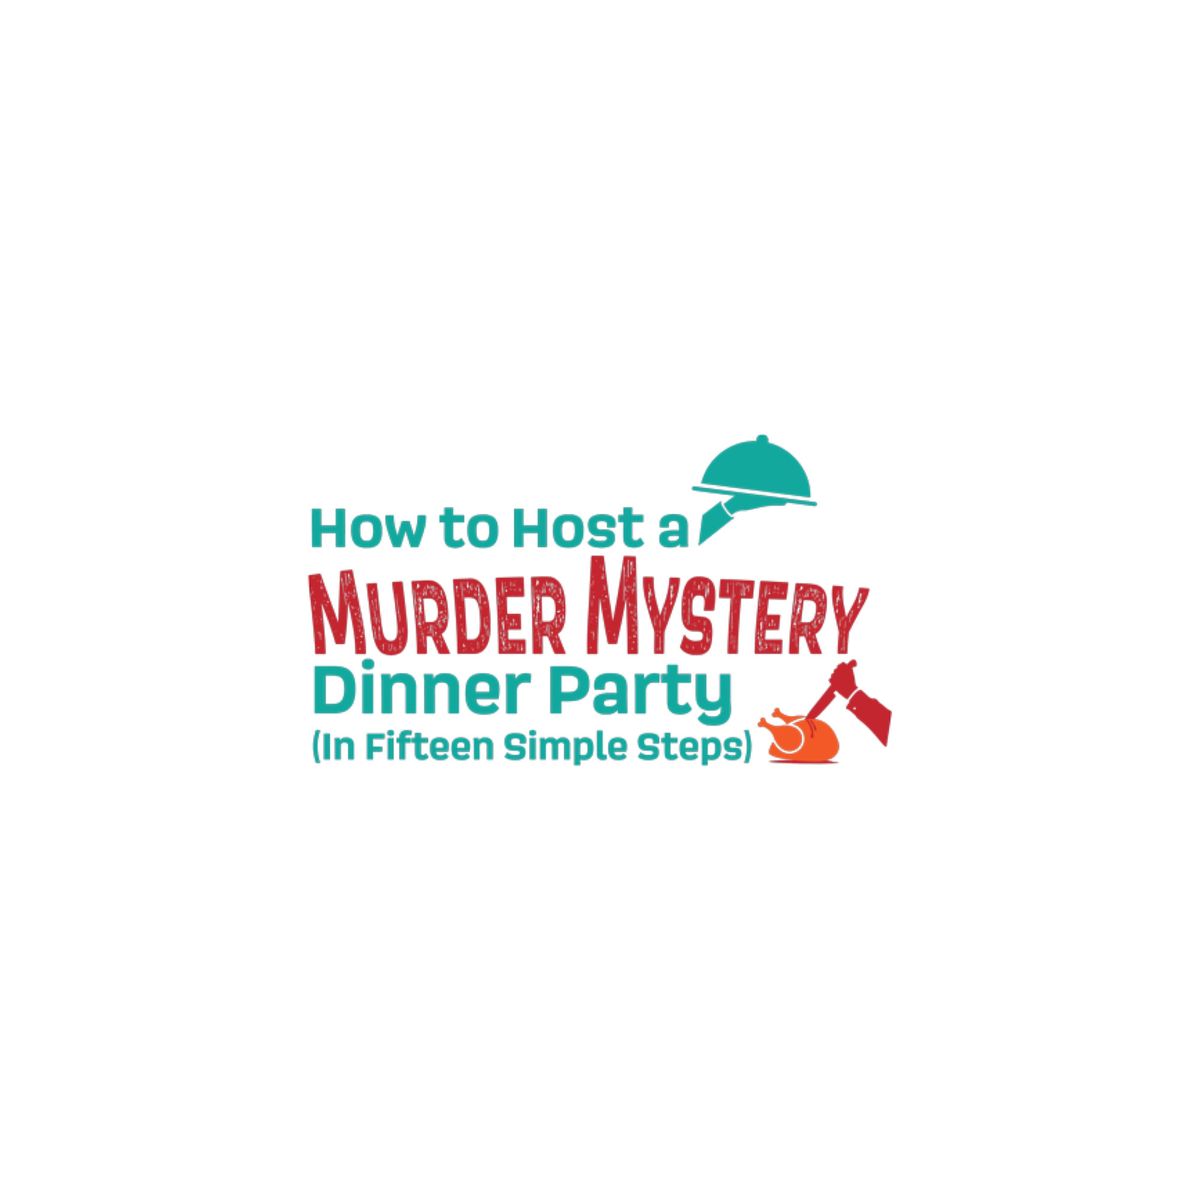 How to Host a M**der Mystery Dinner Party